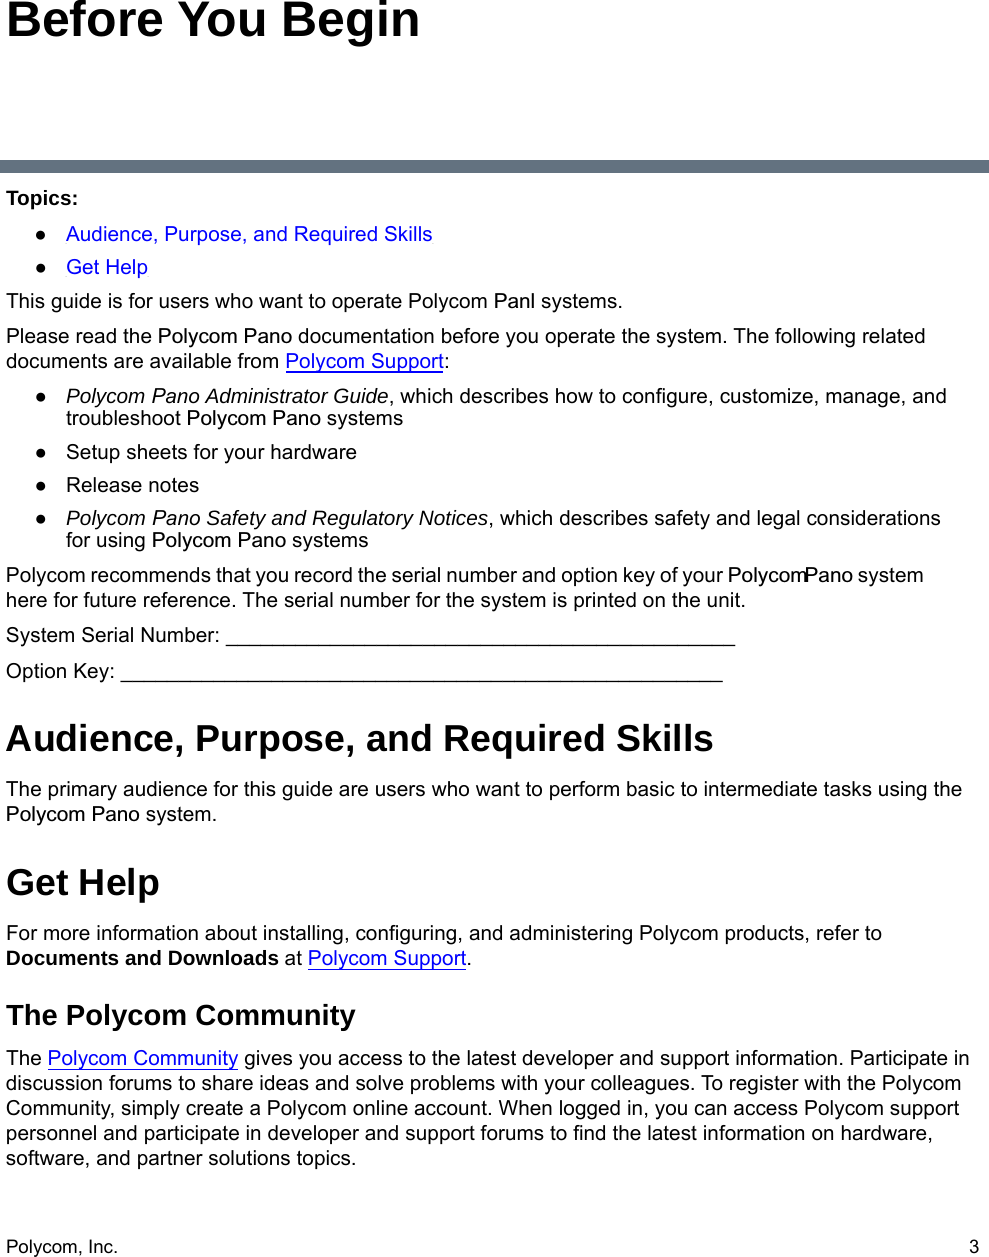 Polycom, Inc.  3Before You BeginTopics:●Audience, Purpose, and Required Skills●Get HelpThis guide is for users who want to operate Polycom Panl systems.Please read the Polycom Pano documentation before you operate the system. The following related documents are available from Polycom Support:●Polycom Pano Administrator Guide, which describes how to configure, customize, manage, andtroubleshoot Polycom Pano systems●Setup sheets for your hardware●Release notes●Polycom Pano Safety and Regulatory Notices, which describes safety and legal considerationsfor using Polycom Pano systemsPolycom recommends that you record the serial number and option key of your PolycomPano system here for future reference. The serial number for the system is printed on the unit.System Serial Number: ____________________________________________Option Key: ____________________________________________________Audience, Purpose, and Required SkillsThe primary audience for this guide are users who want to perform basic to intermediate tasks using the Polycom Pano system. Get HelpFor more information about installing, configuring, and administering Polycom products, refer to Documents and Downloads at Polycom Support.The Polycom CommunityThe Polycom Community gives you access to the latest developer and support information. Participate in discussion forums to share ideas and solve problems with your colleagues. To register with the Polycom Community, simply create a Polycom online account. When logged in, you can access Polycom support personnel and participate in developer and support forums to find the latest information on hardware, software, and partner solutions topics.